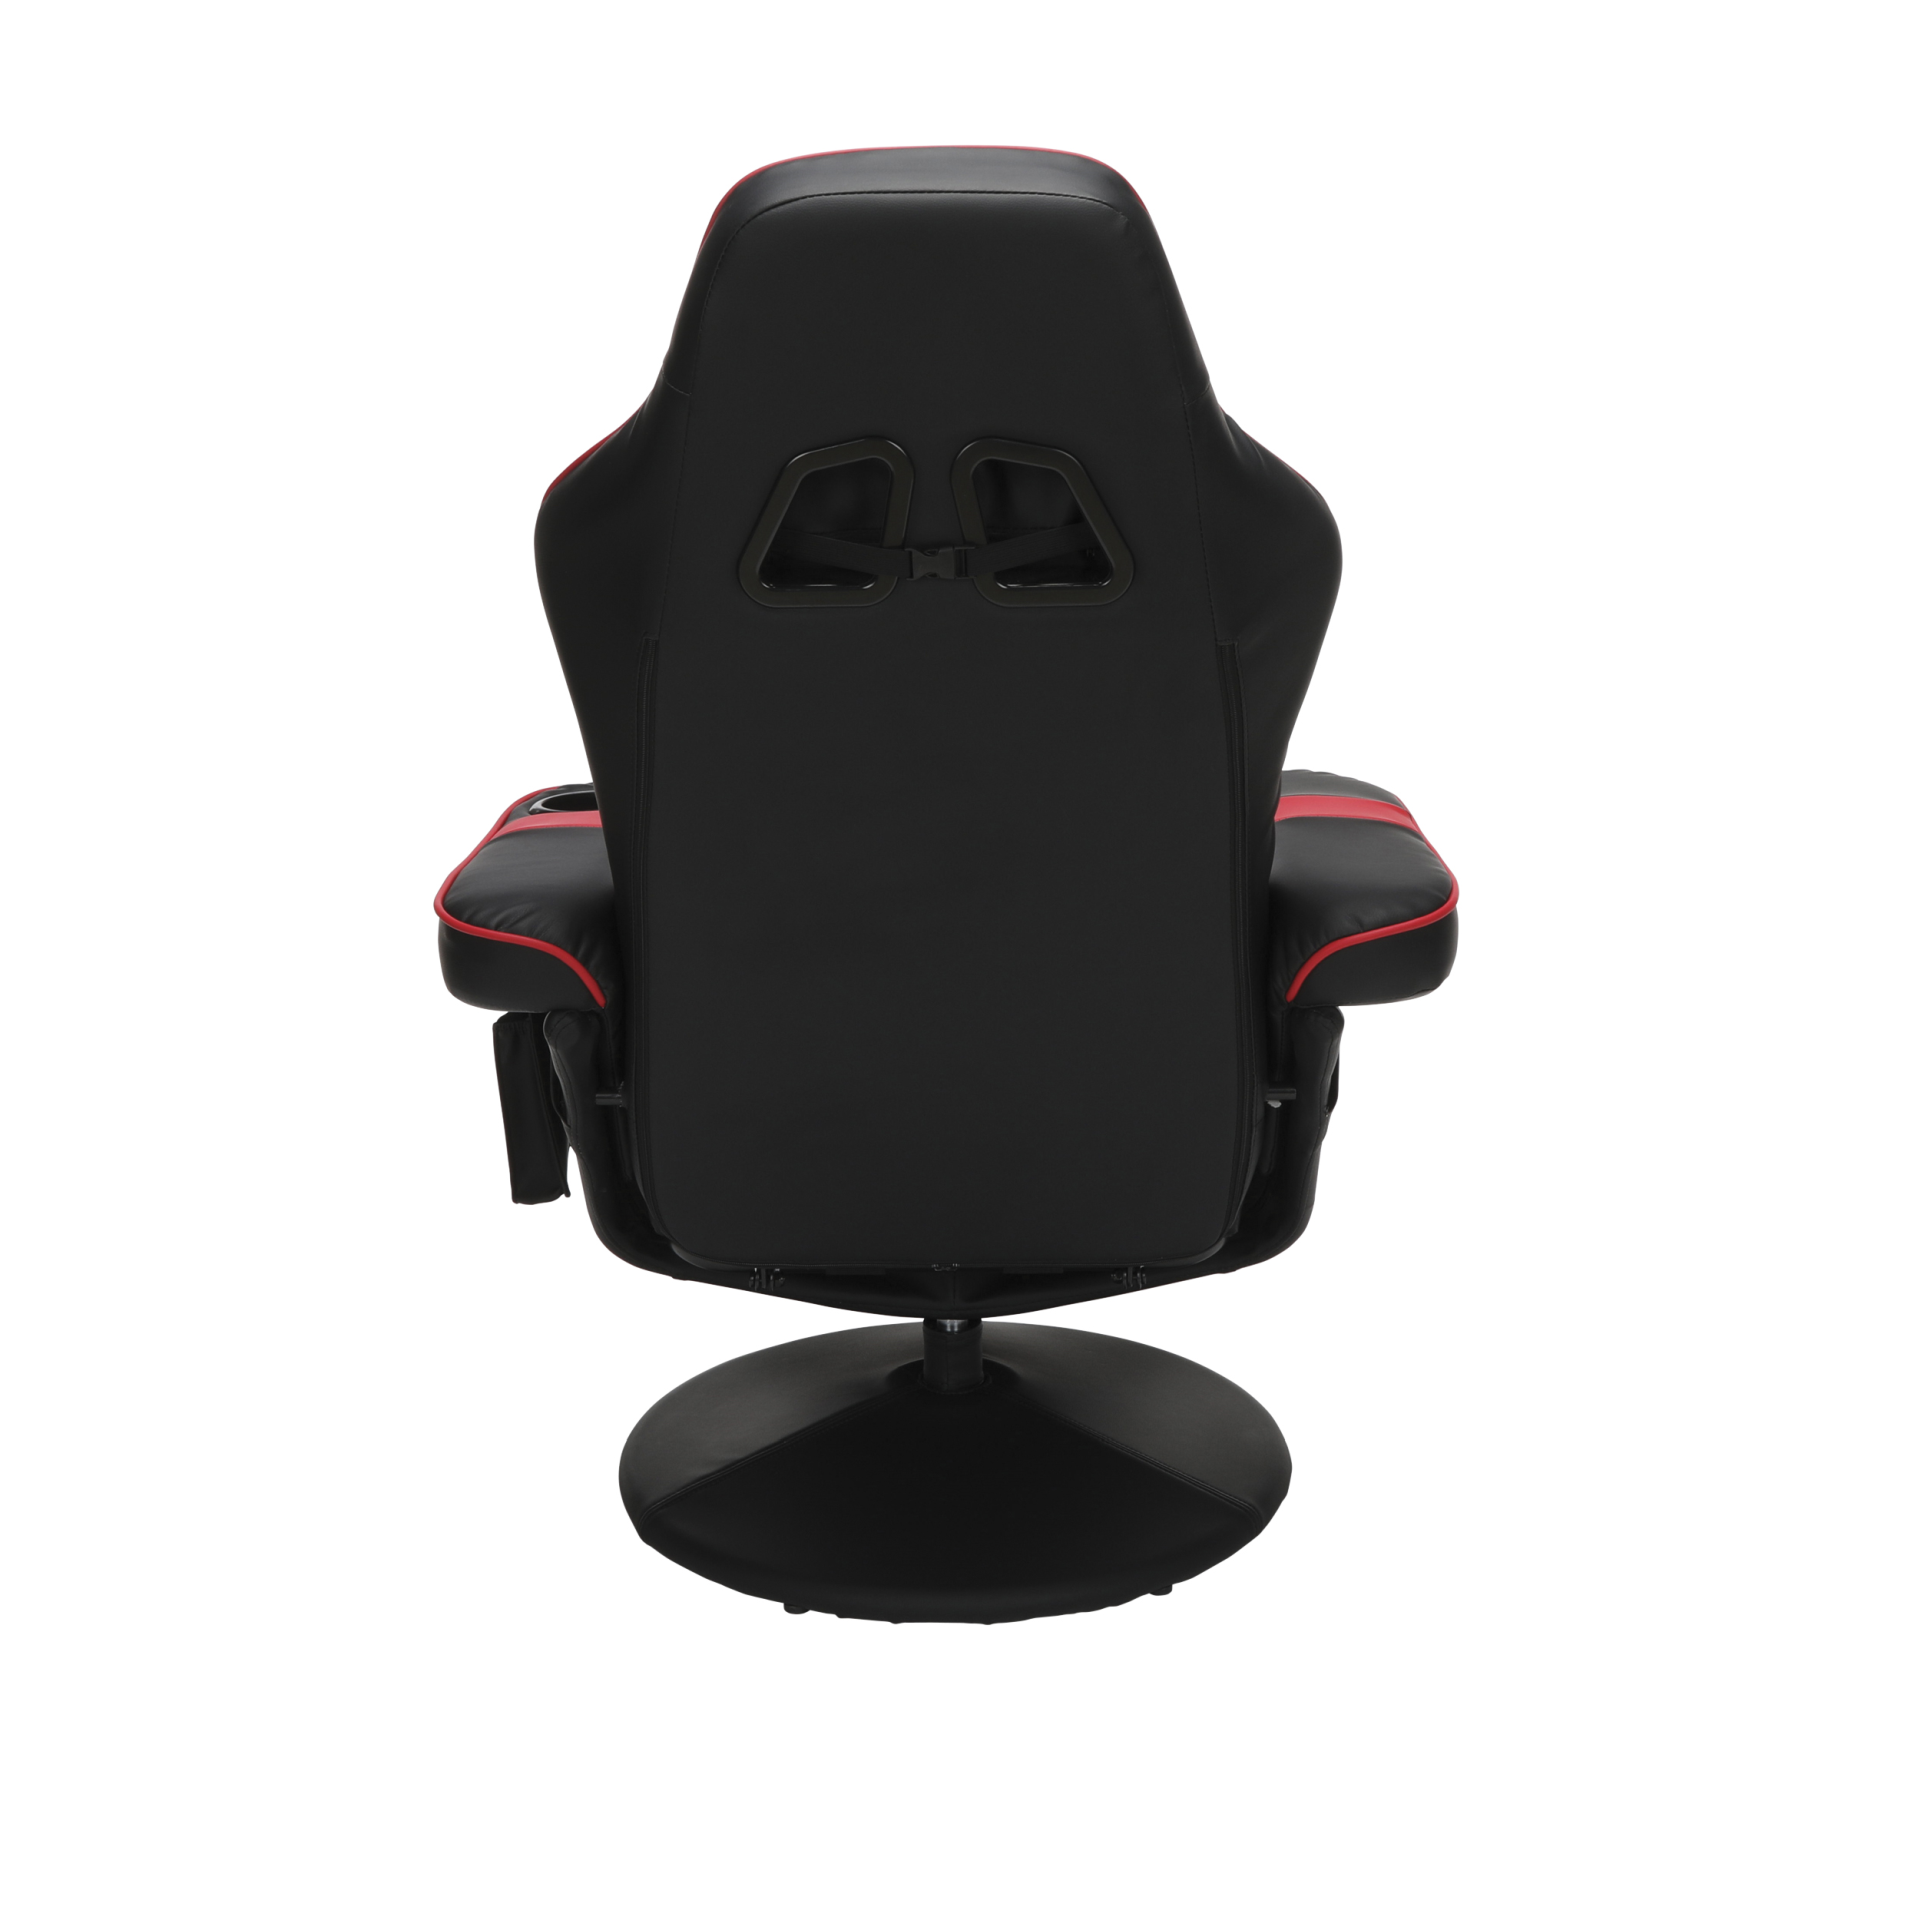 RESPAWN RSP-900 Gaming Recliner #28